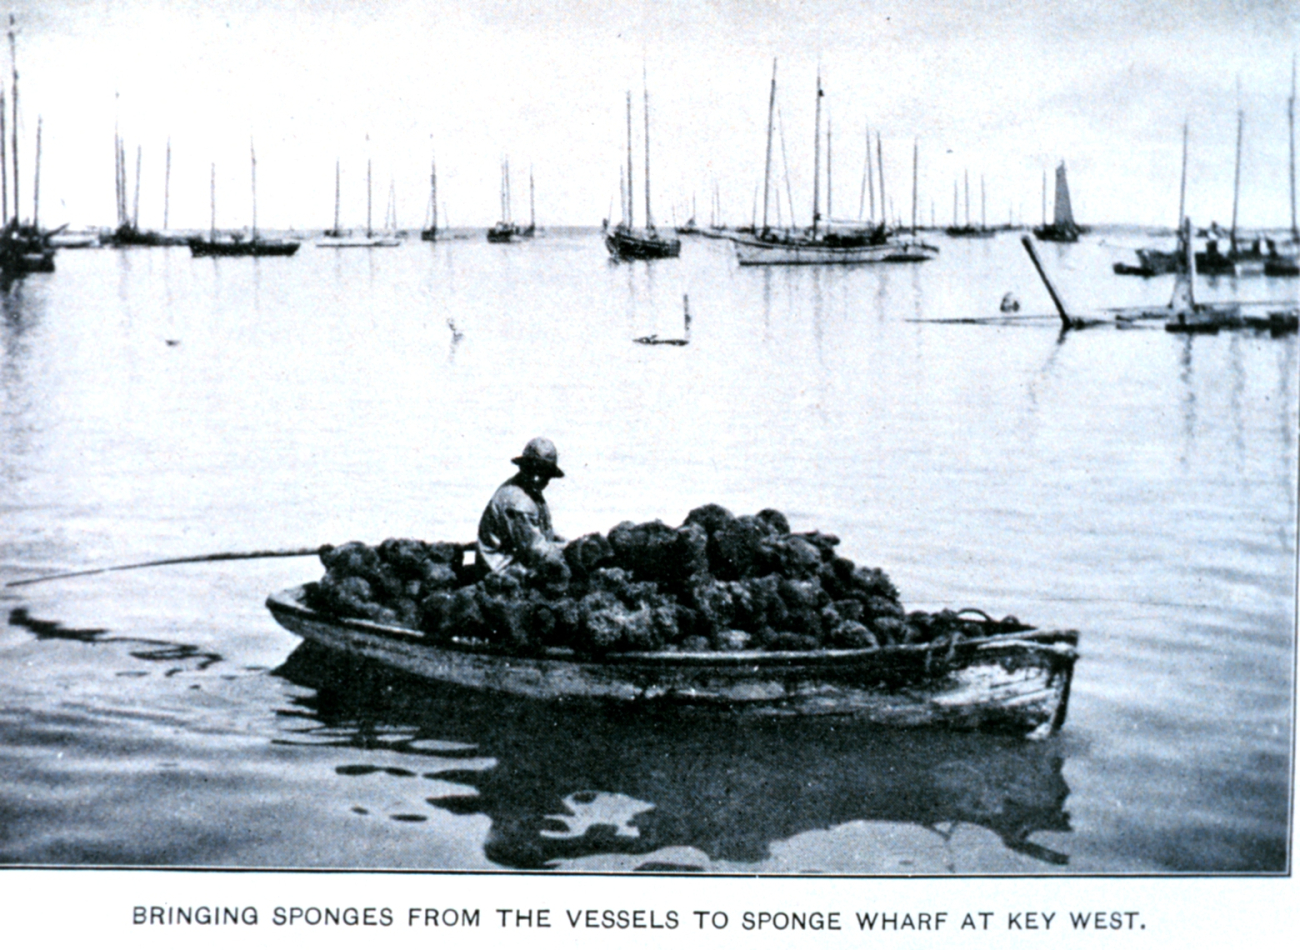 Bringing sponges from the vessels to sponge wharf at Key West